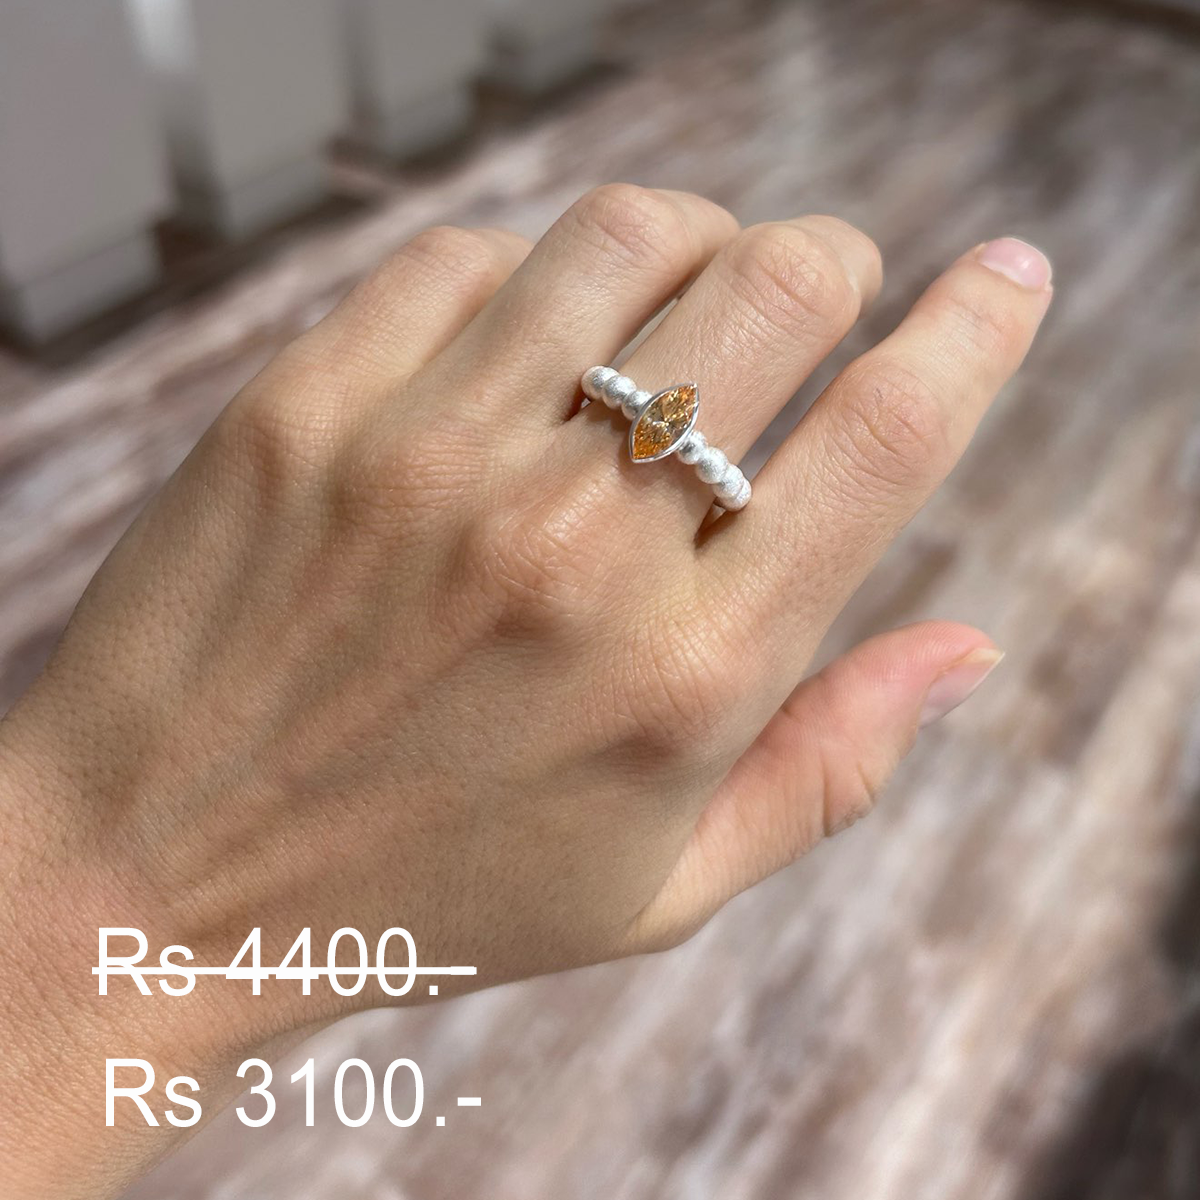 Discounted champagne stone ring